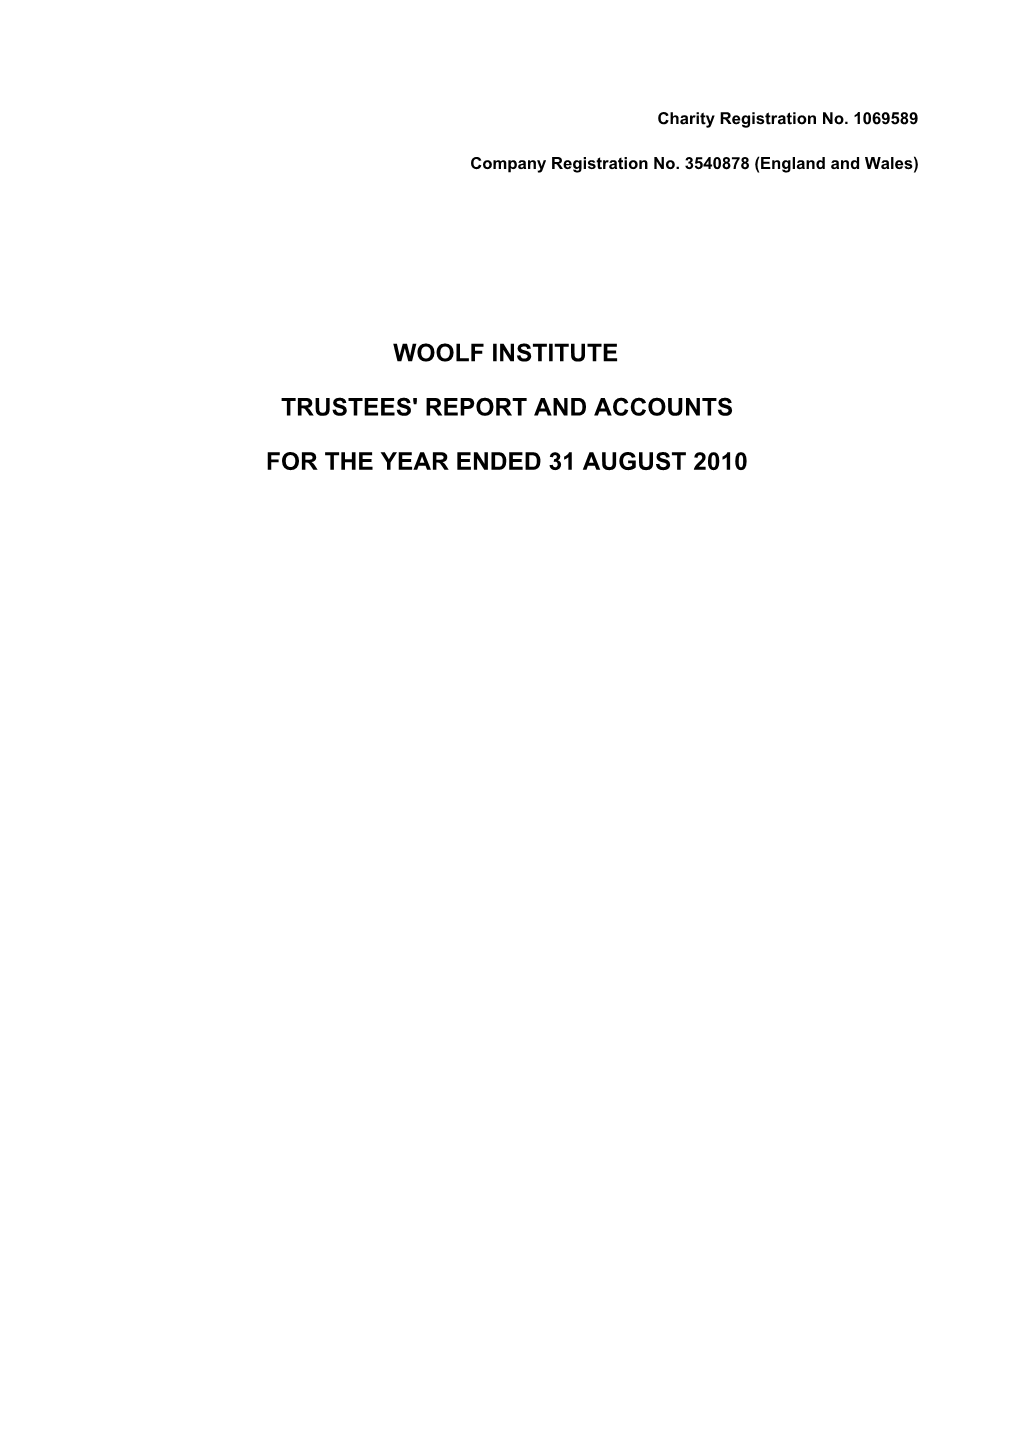 Woolf Institute Trustees' Report and Accounts For